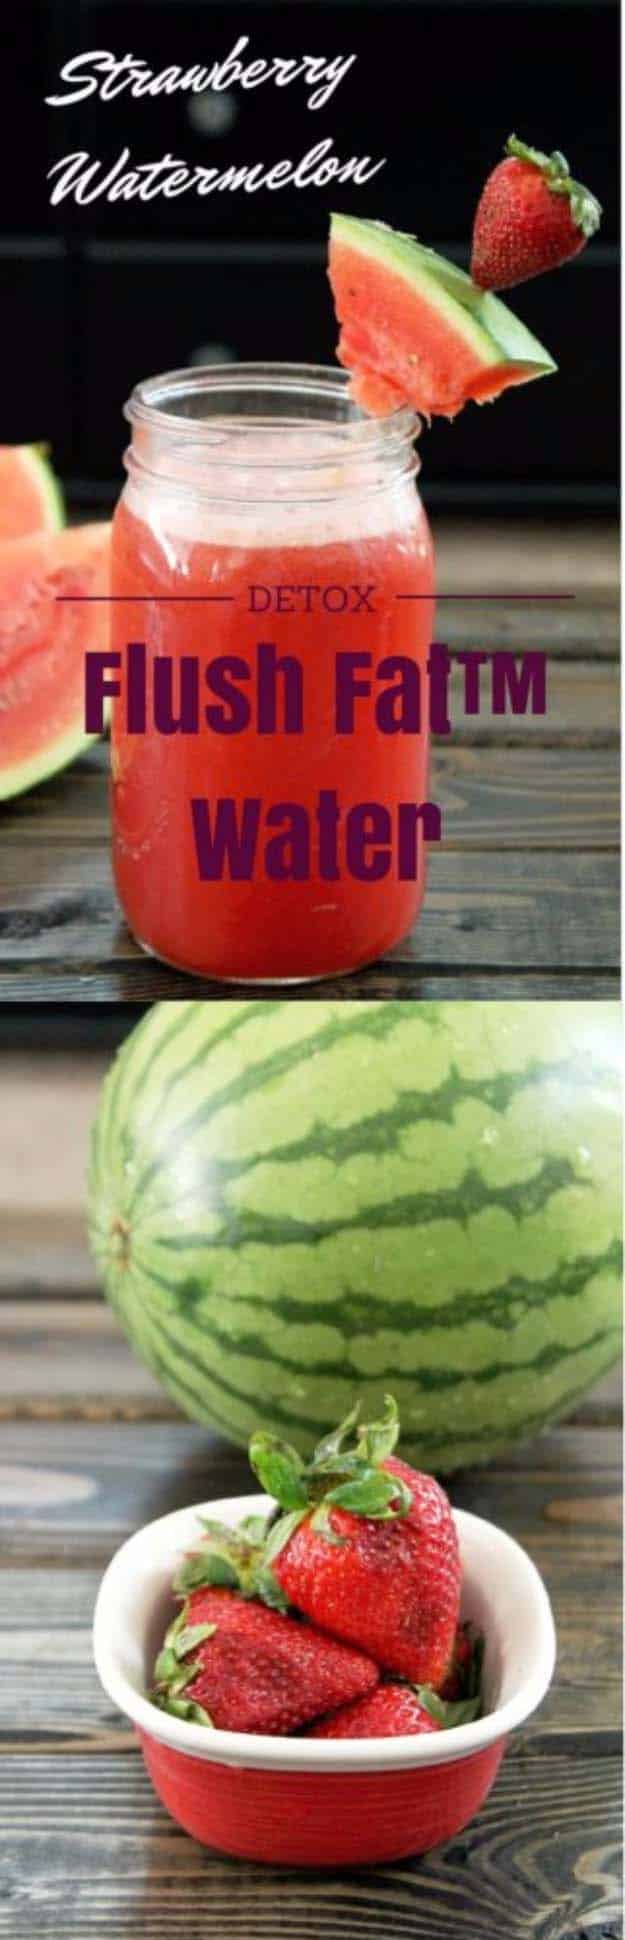  31 Detox Water Recipes for Drinks To Cleanse Skin and Body. Easy to Make Waters and Tea Promote Health, Diet and Support Weightloss | Strawberry Watermelon Flush Fat Water #detox #recipes #detoxwater #healthy 